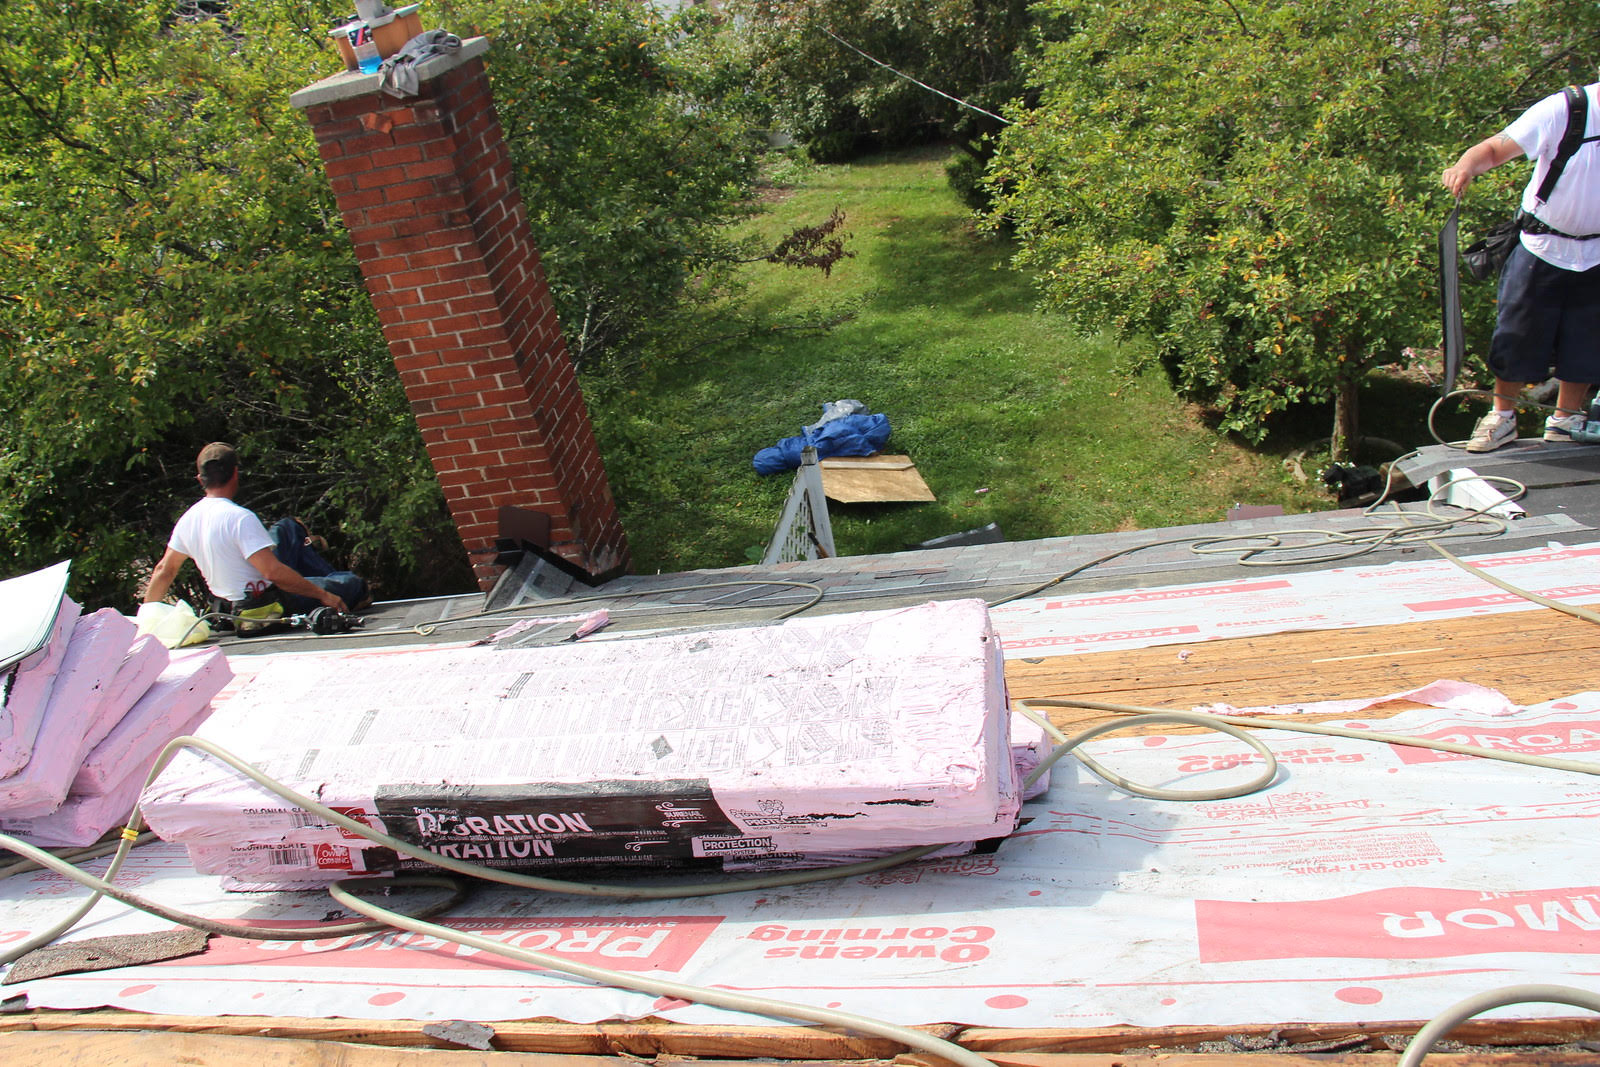 Diy Roof Repairs Or Hire A Roofing Contractor?